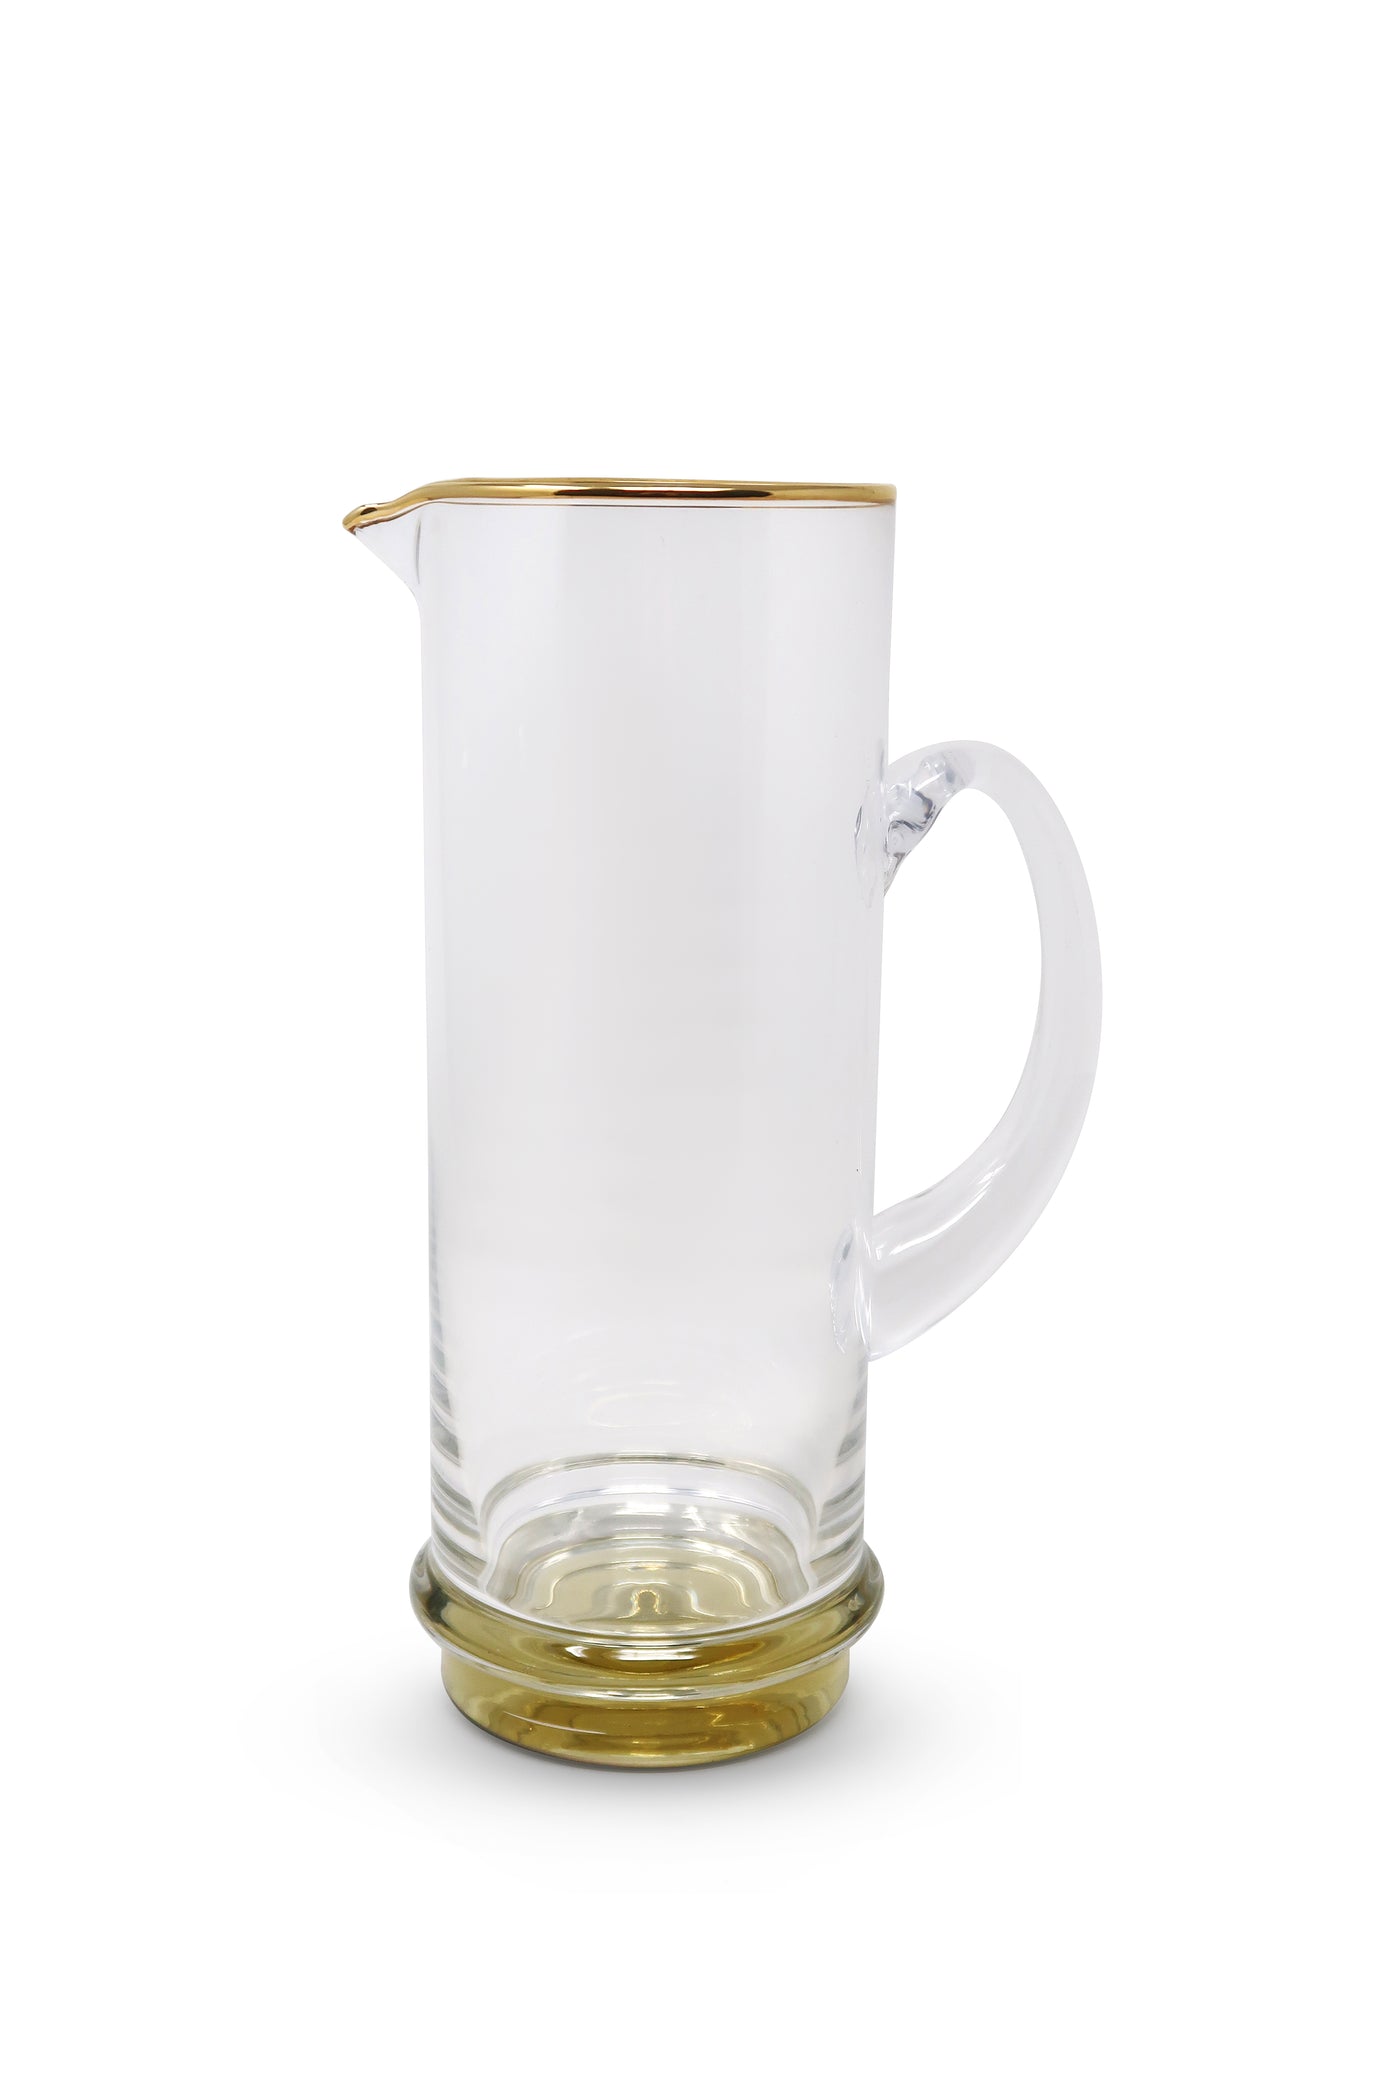 Pitcher with Gold Base and Rim, 10.5"H